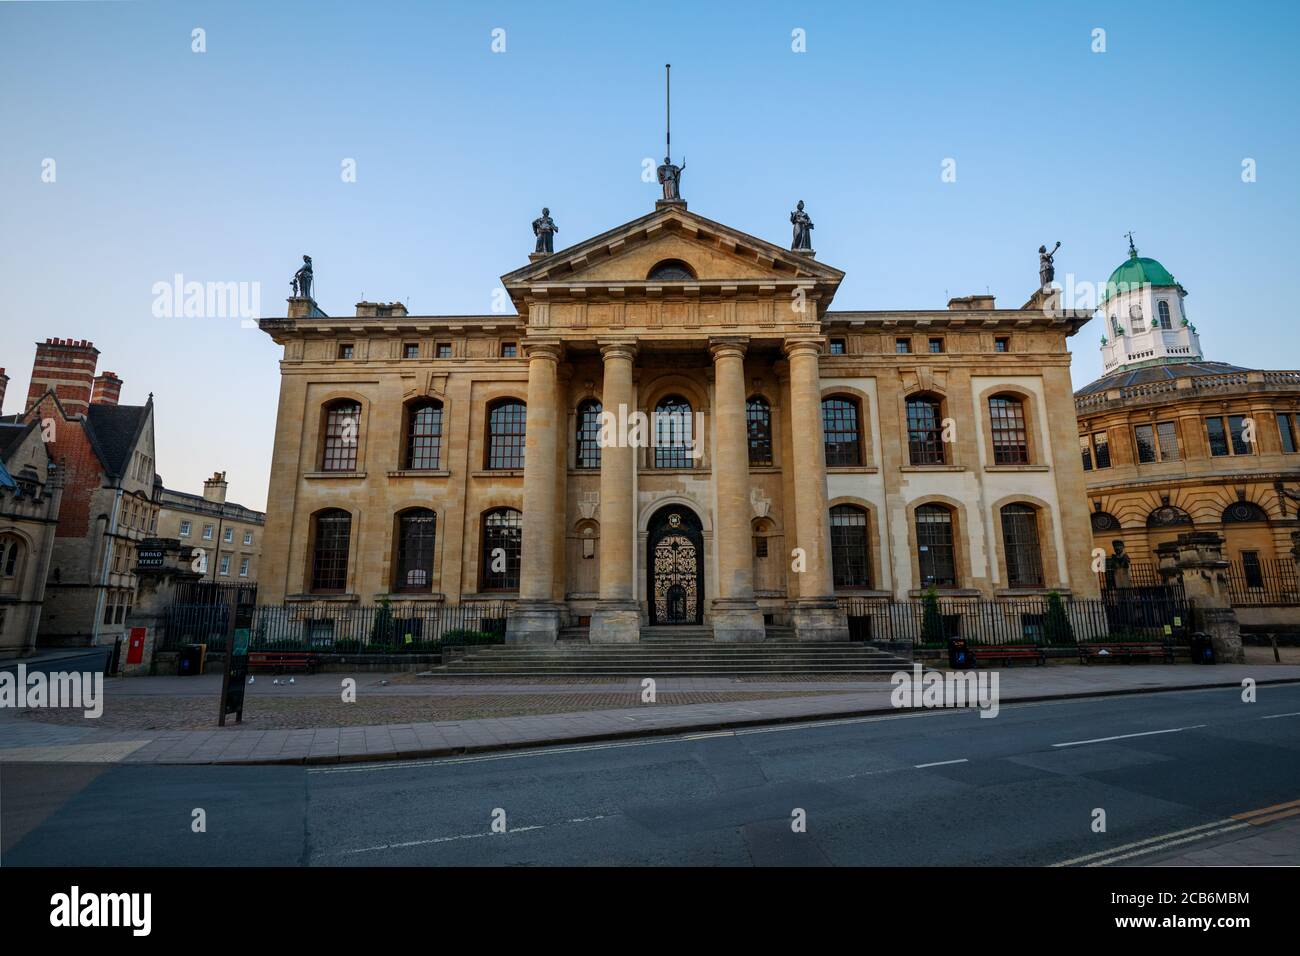 The Clarendon Building from Broad Street in Oxford with no people. Early in the morning with the Sheldonian Theatre beside it. Oxford, England, UK. Stock Photo